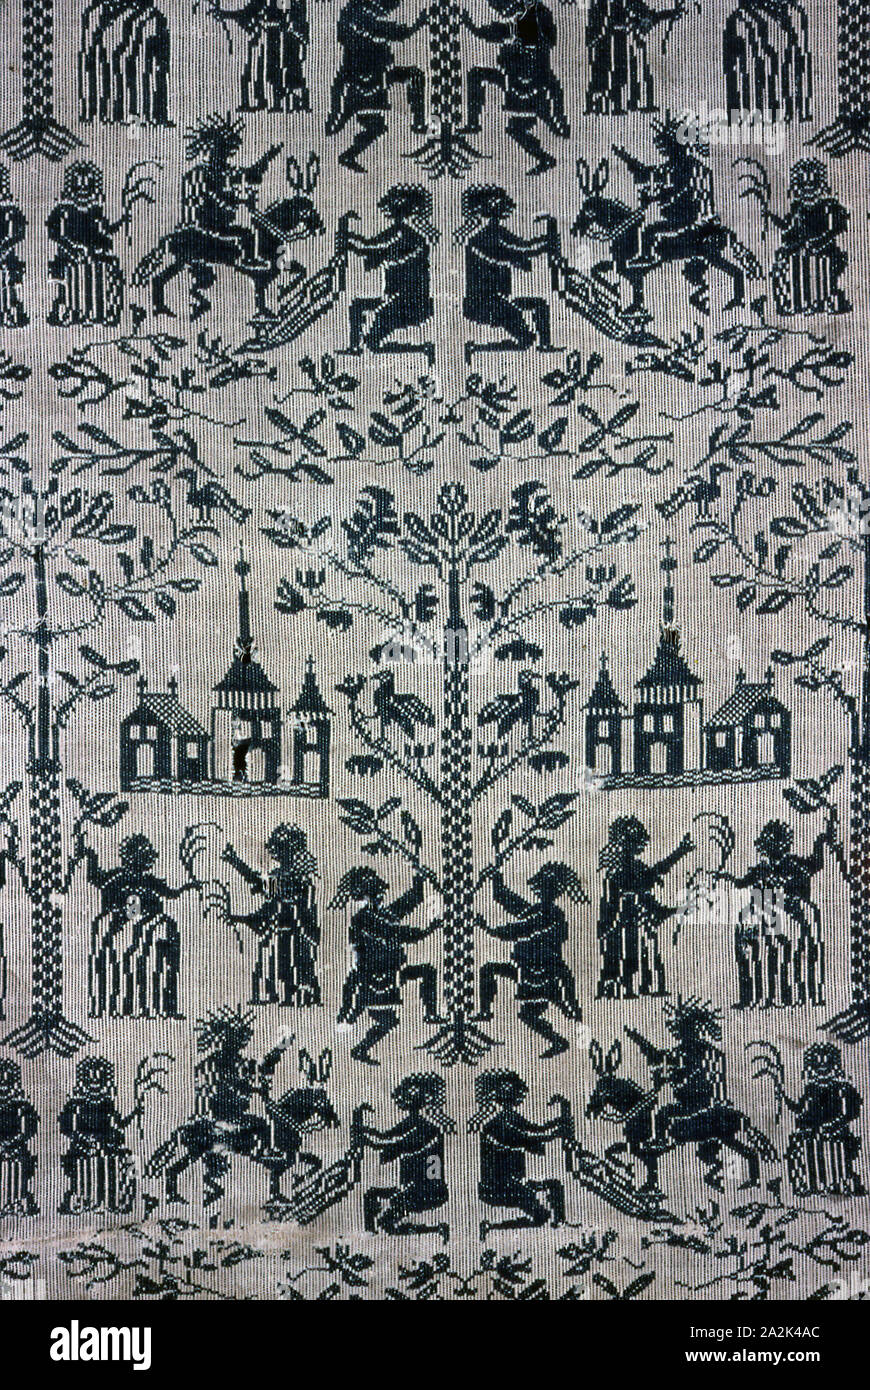 Panel Showing Christ’s Entrance into Jerusalem, 17th century, Germany, Schleswig-Holstein (from North Friesland, Bredstedt), Schleswig-Holstein, Linen and wool, plain weave, tied and free double cloth, 143.9 x 81.7 cm (56 5/8 x 32 1/8 in Stock Photo